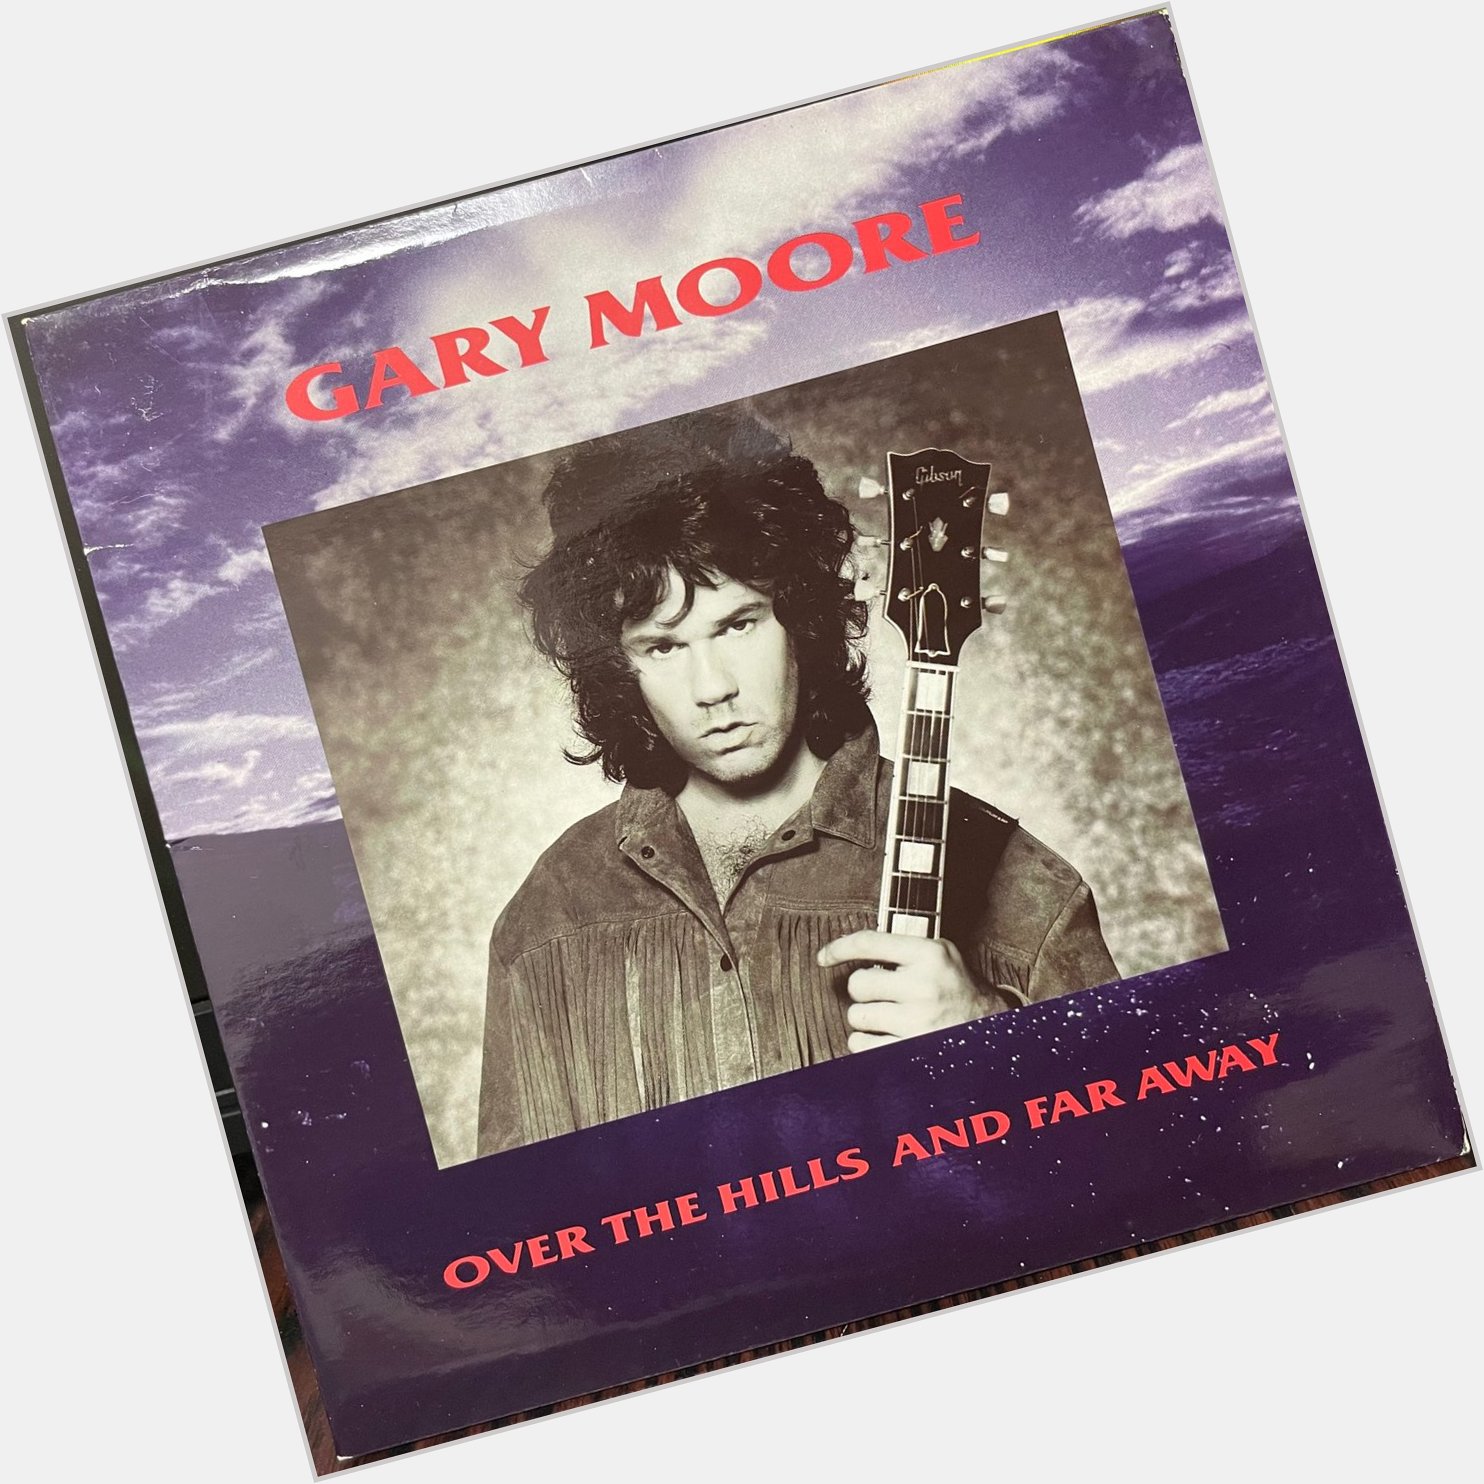 Happy Birthday Gary Moore
My most favorite tune \Over The Hills And Far Away\ 